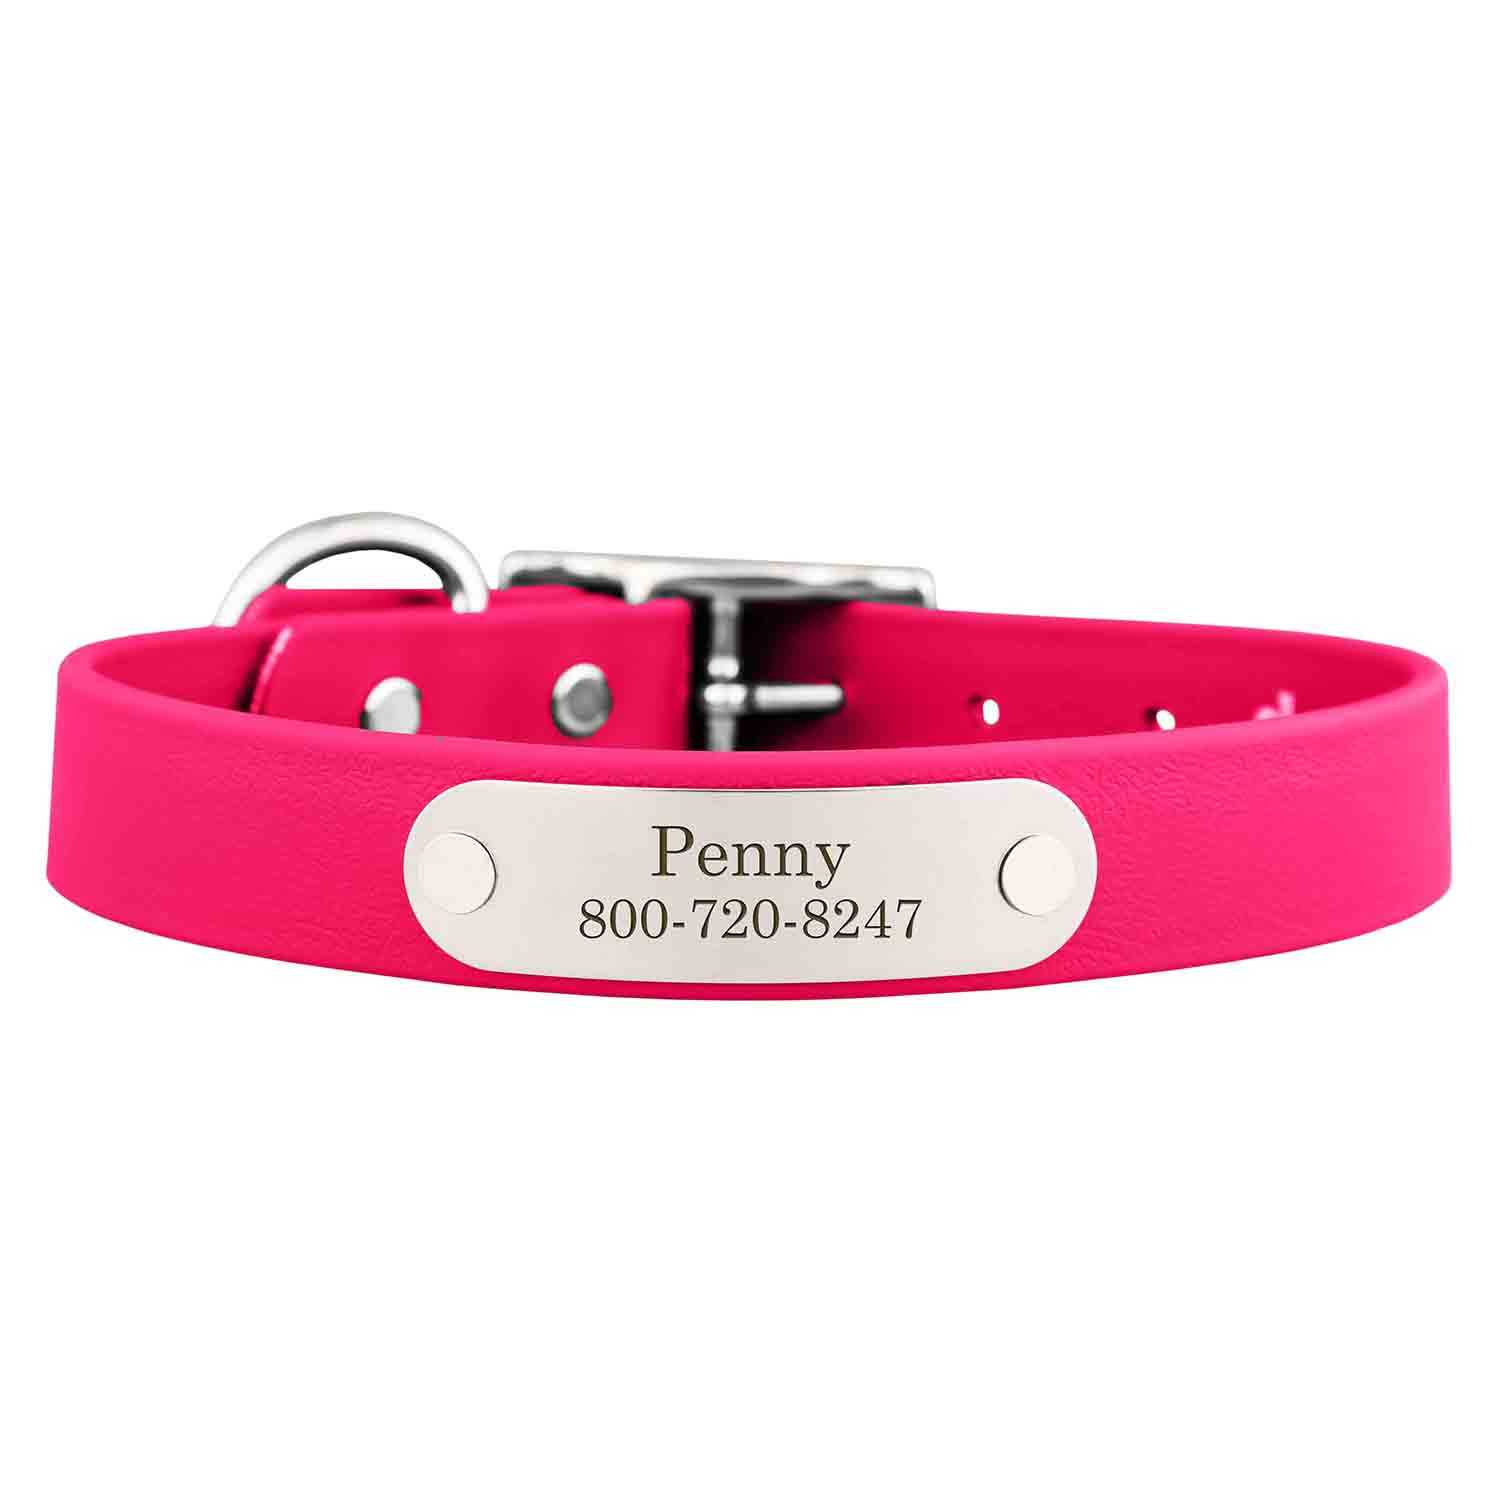 Waterproof Dog Collar with Personalized Nameplate dogIDs